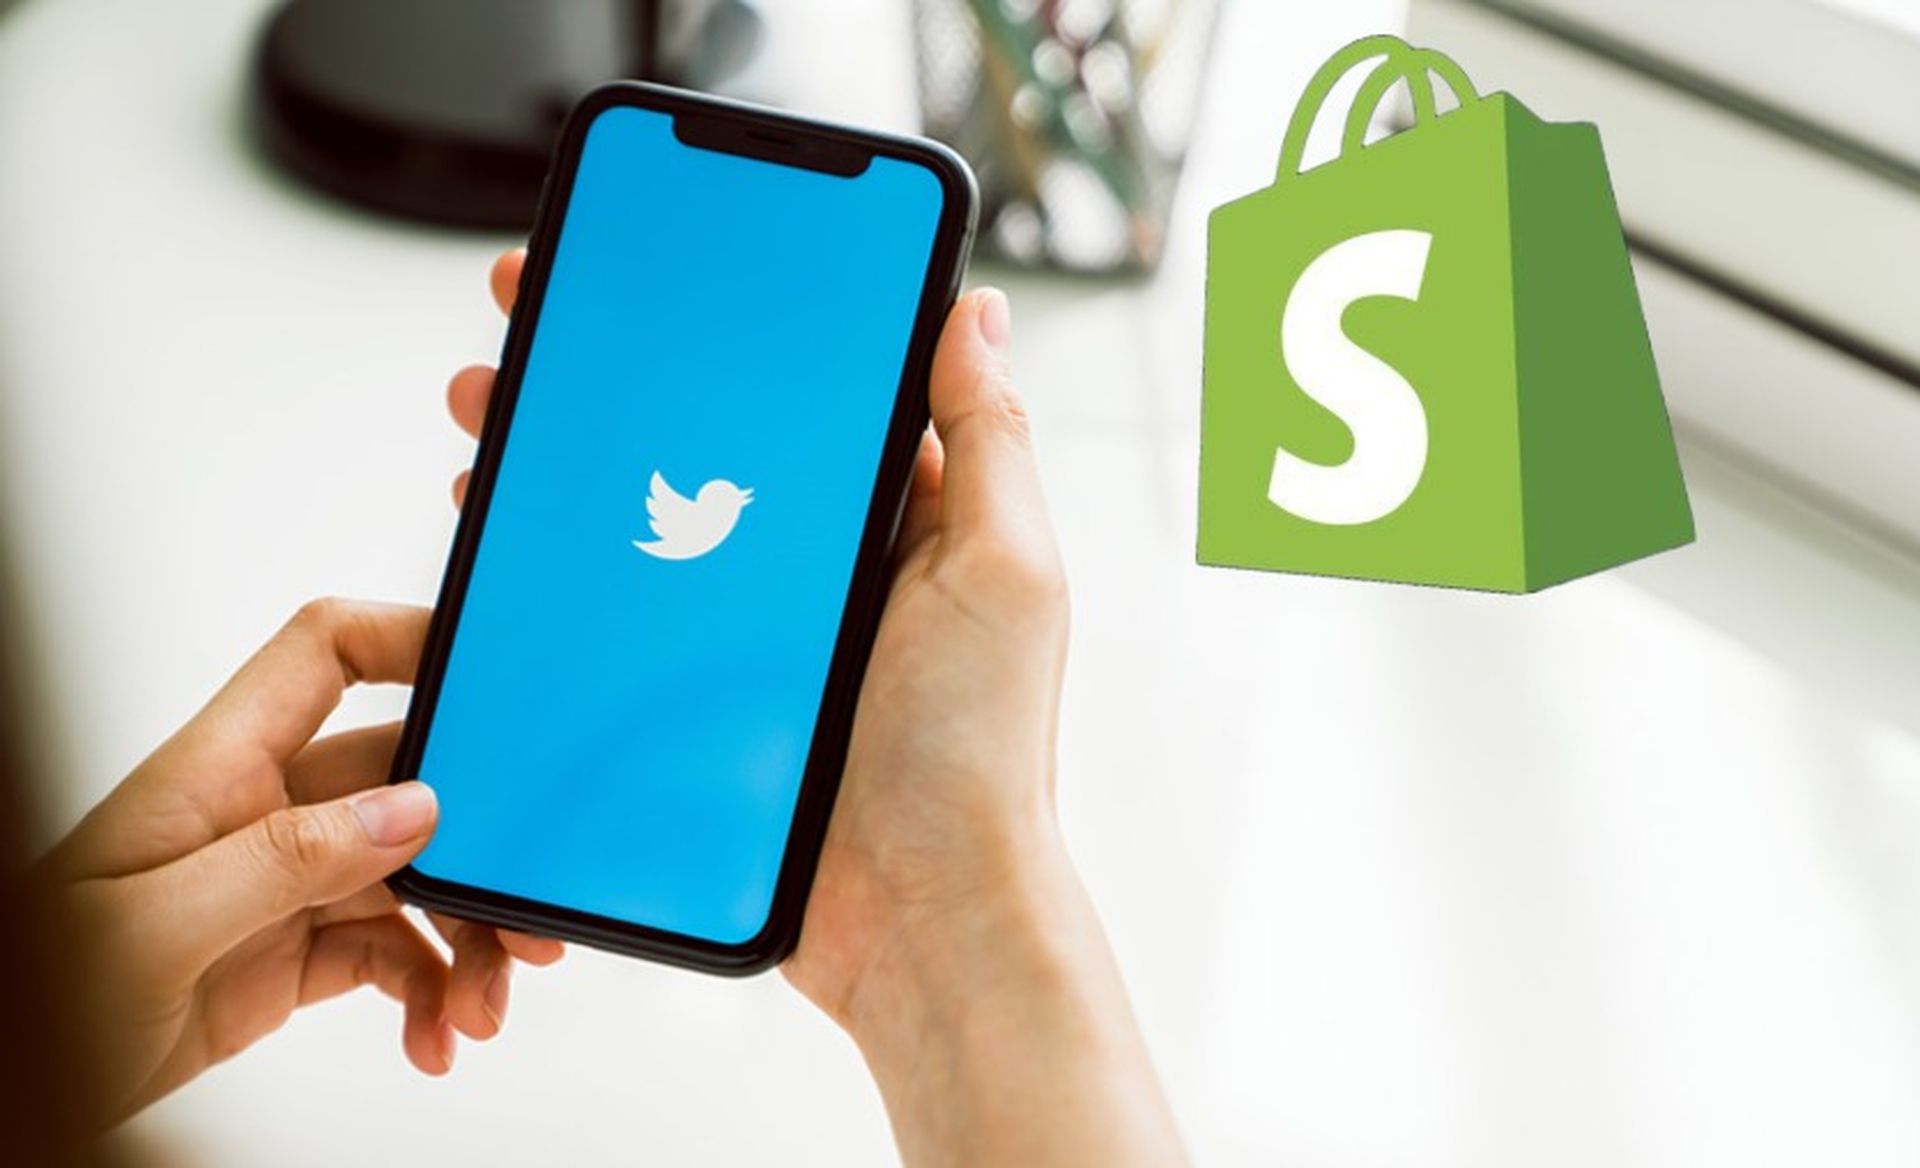 Shopify Twitter integration will enable Shopify merchants to list their items on their Twitter Professional Profiles, with each item directing customers.